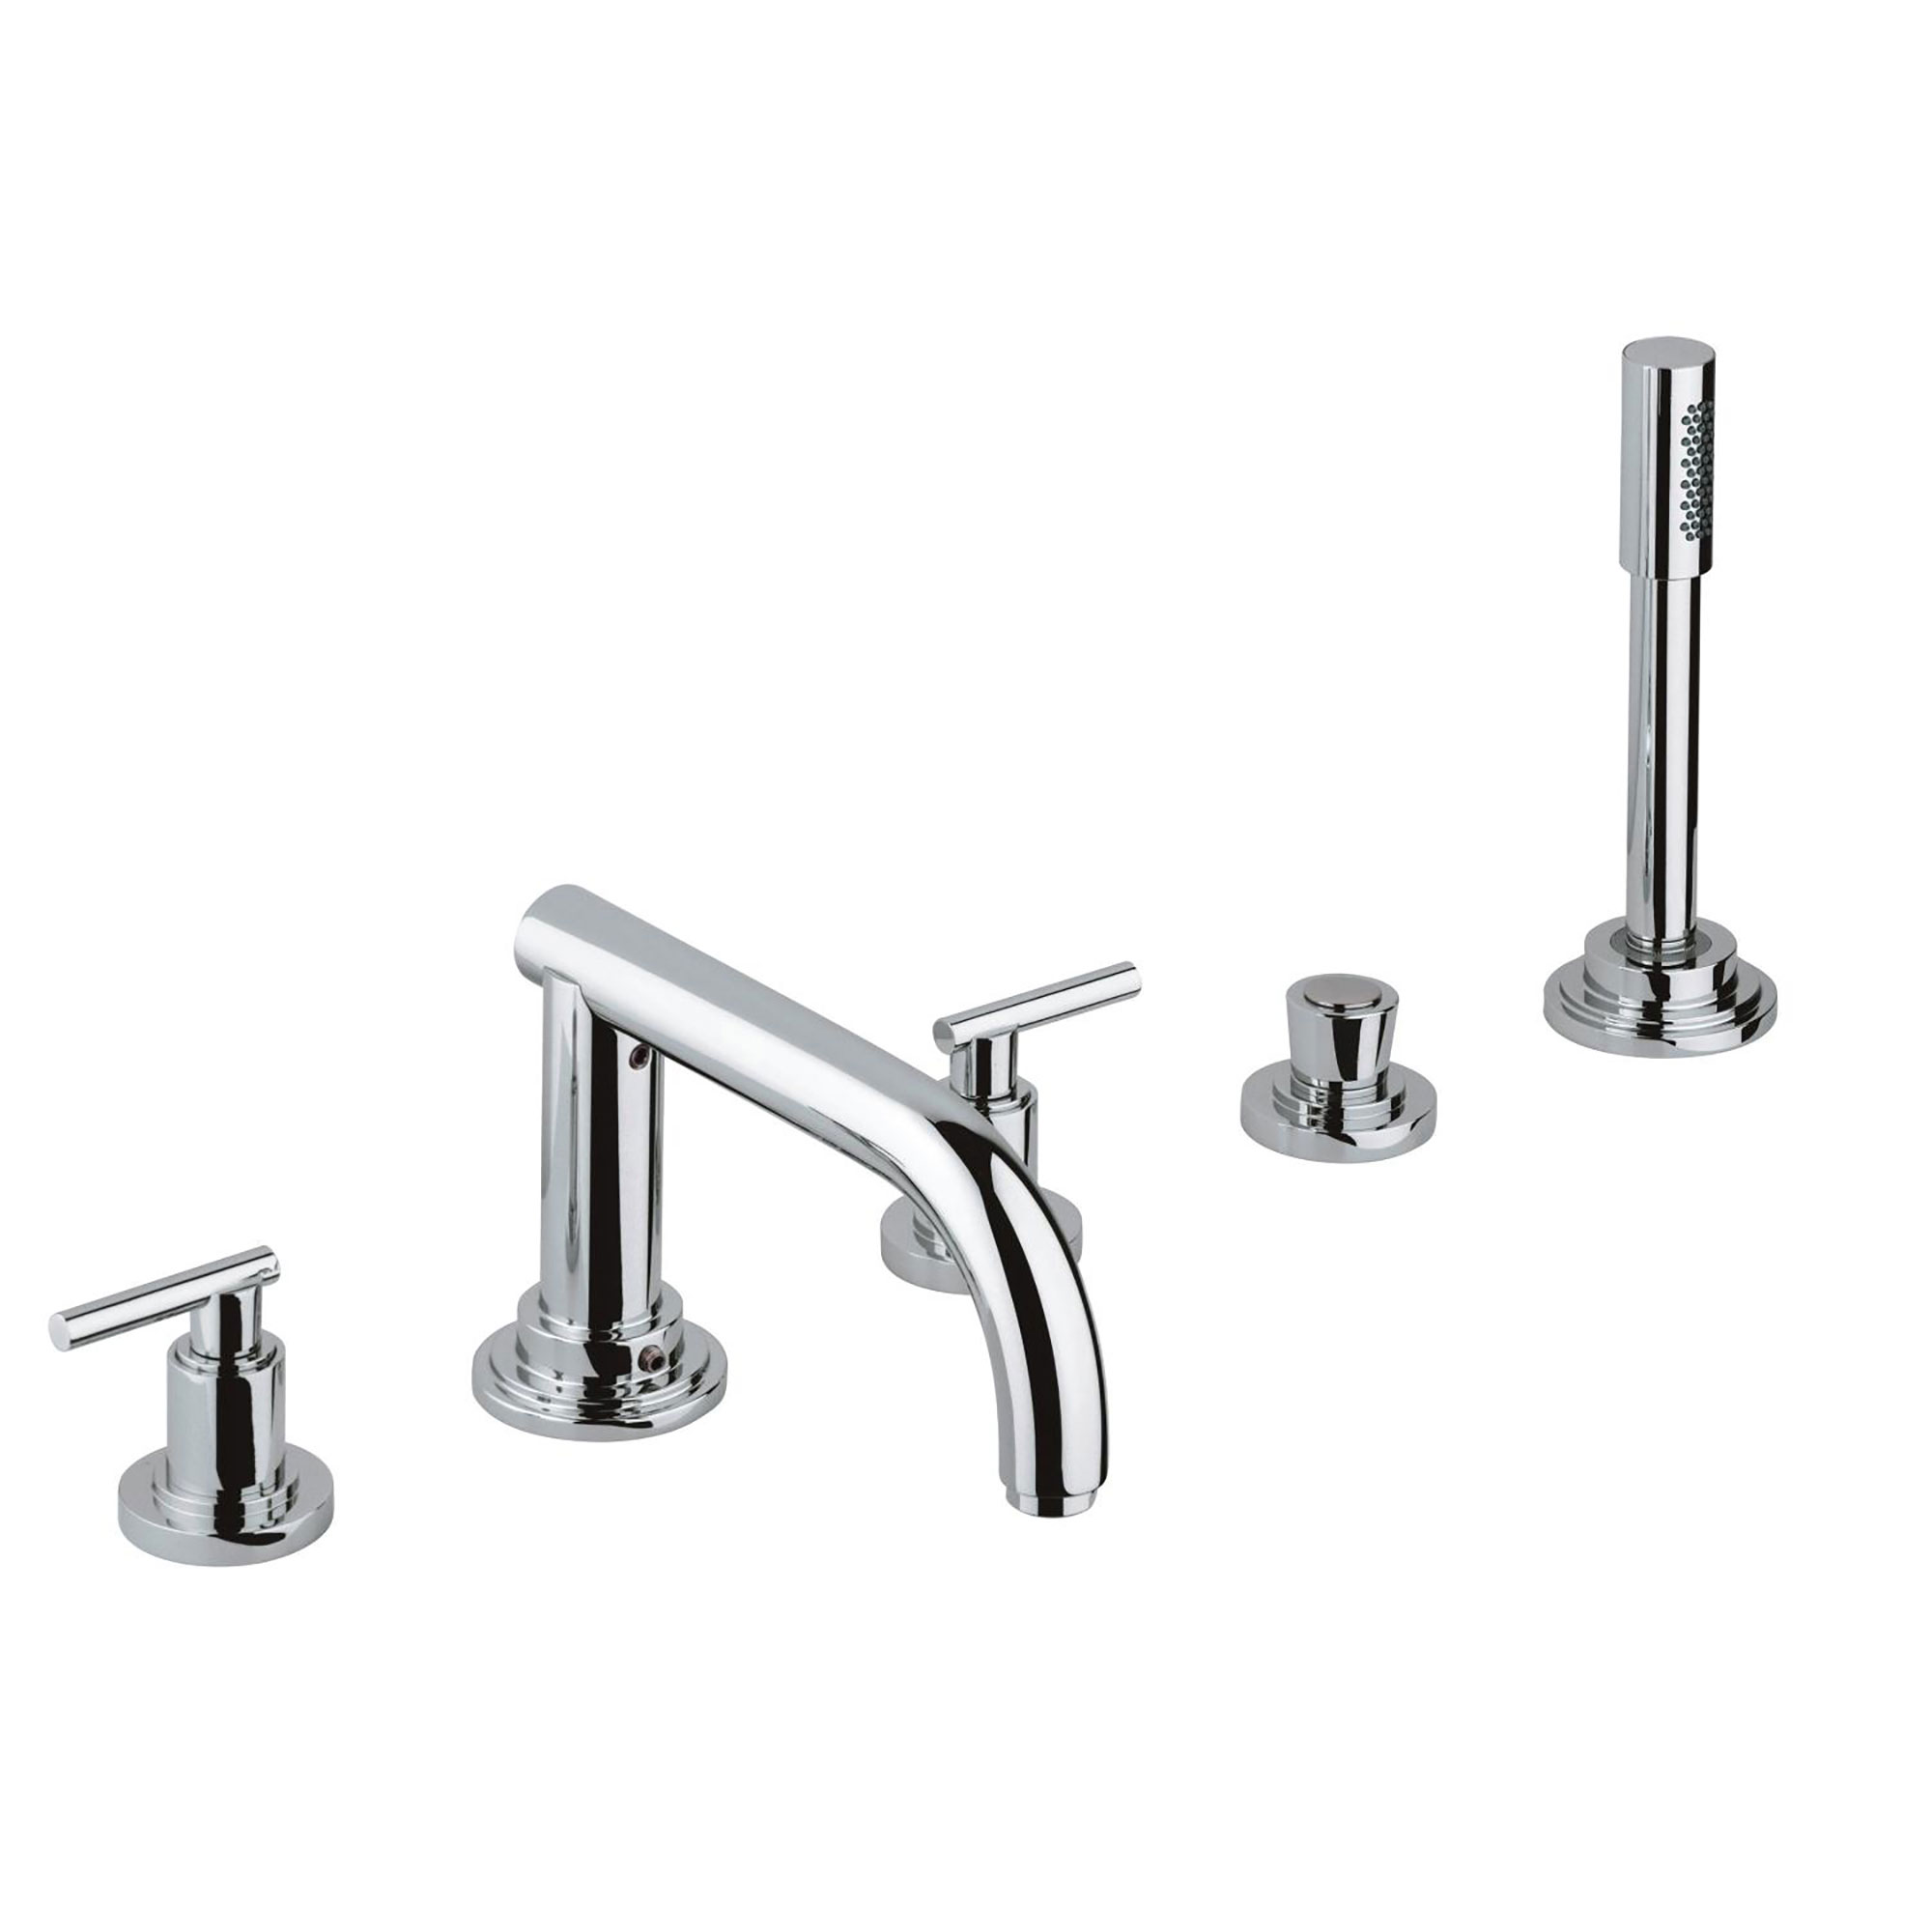 5-Hole 2-Handle Deck Mount Roman Tub Faucet with 9.5 L/min (2.5 gpm) Hand Shower